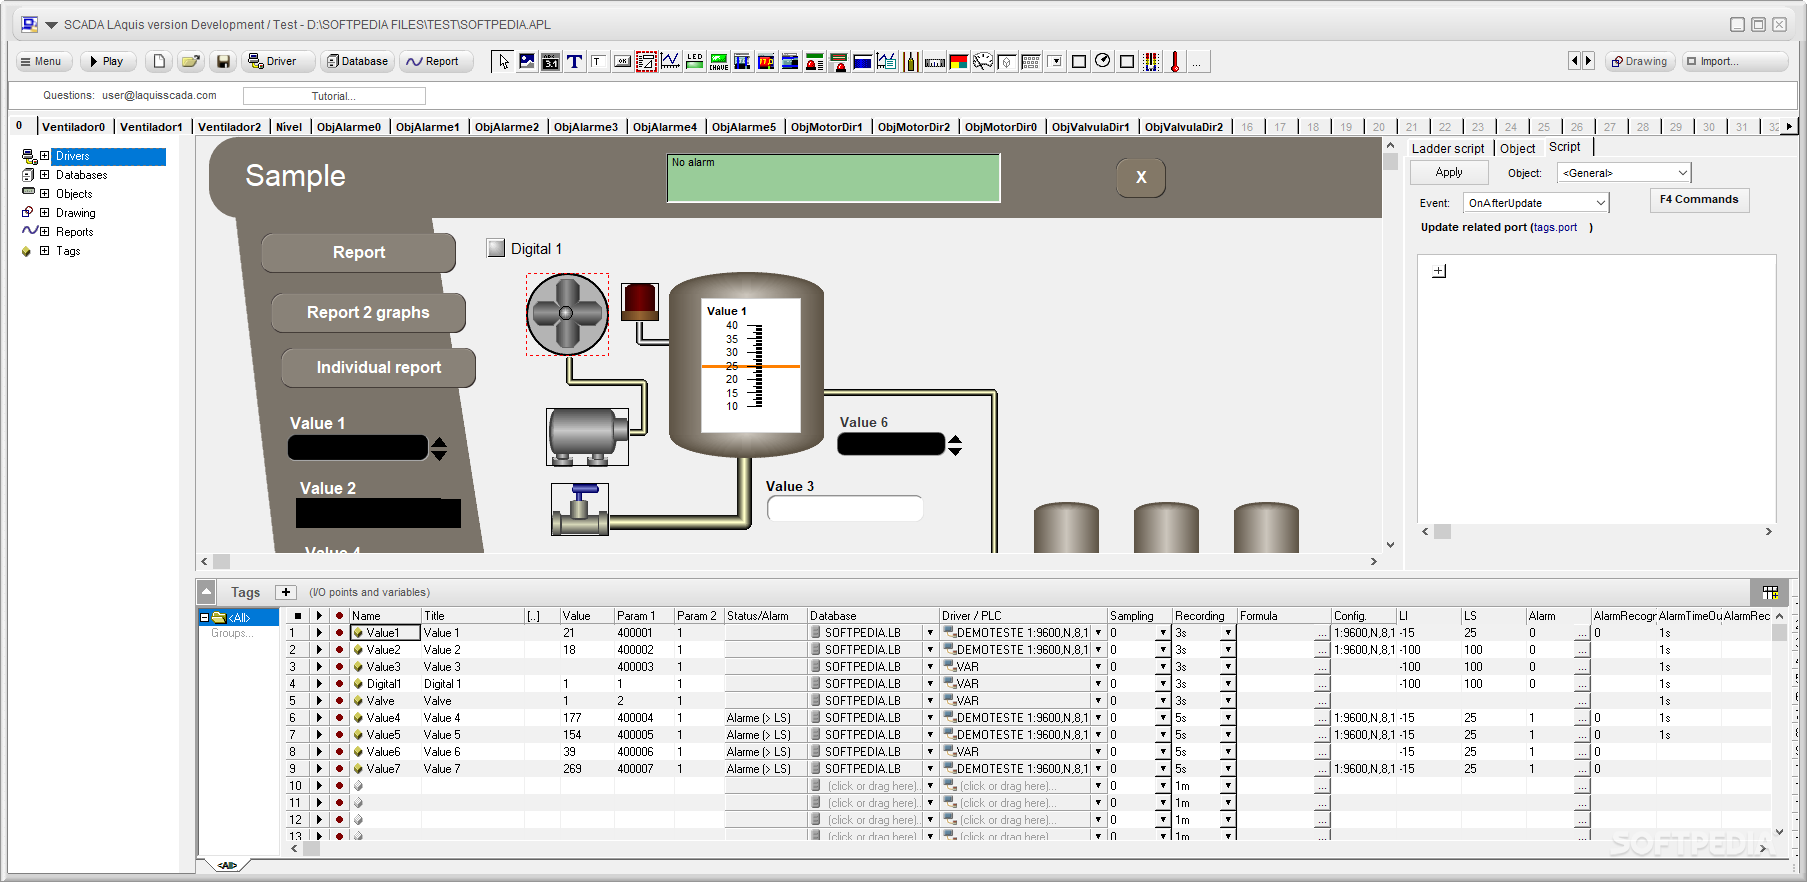 Download SCADA LAquis 4.5.1.677 (Windows) – Download & Review Free